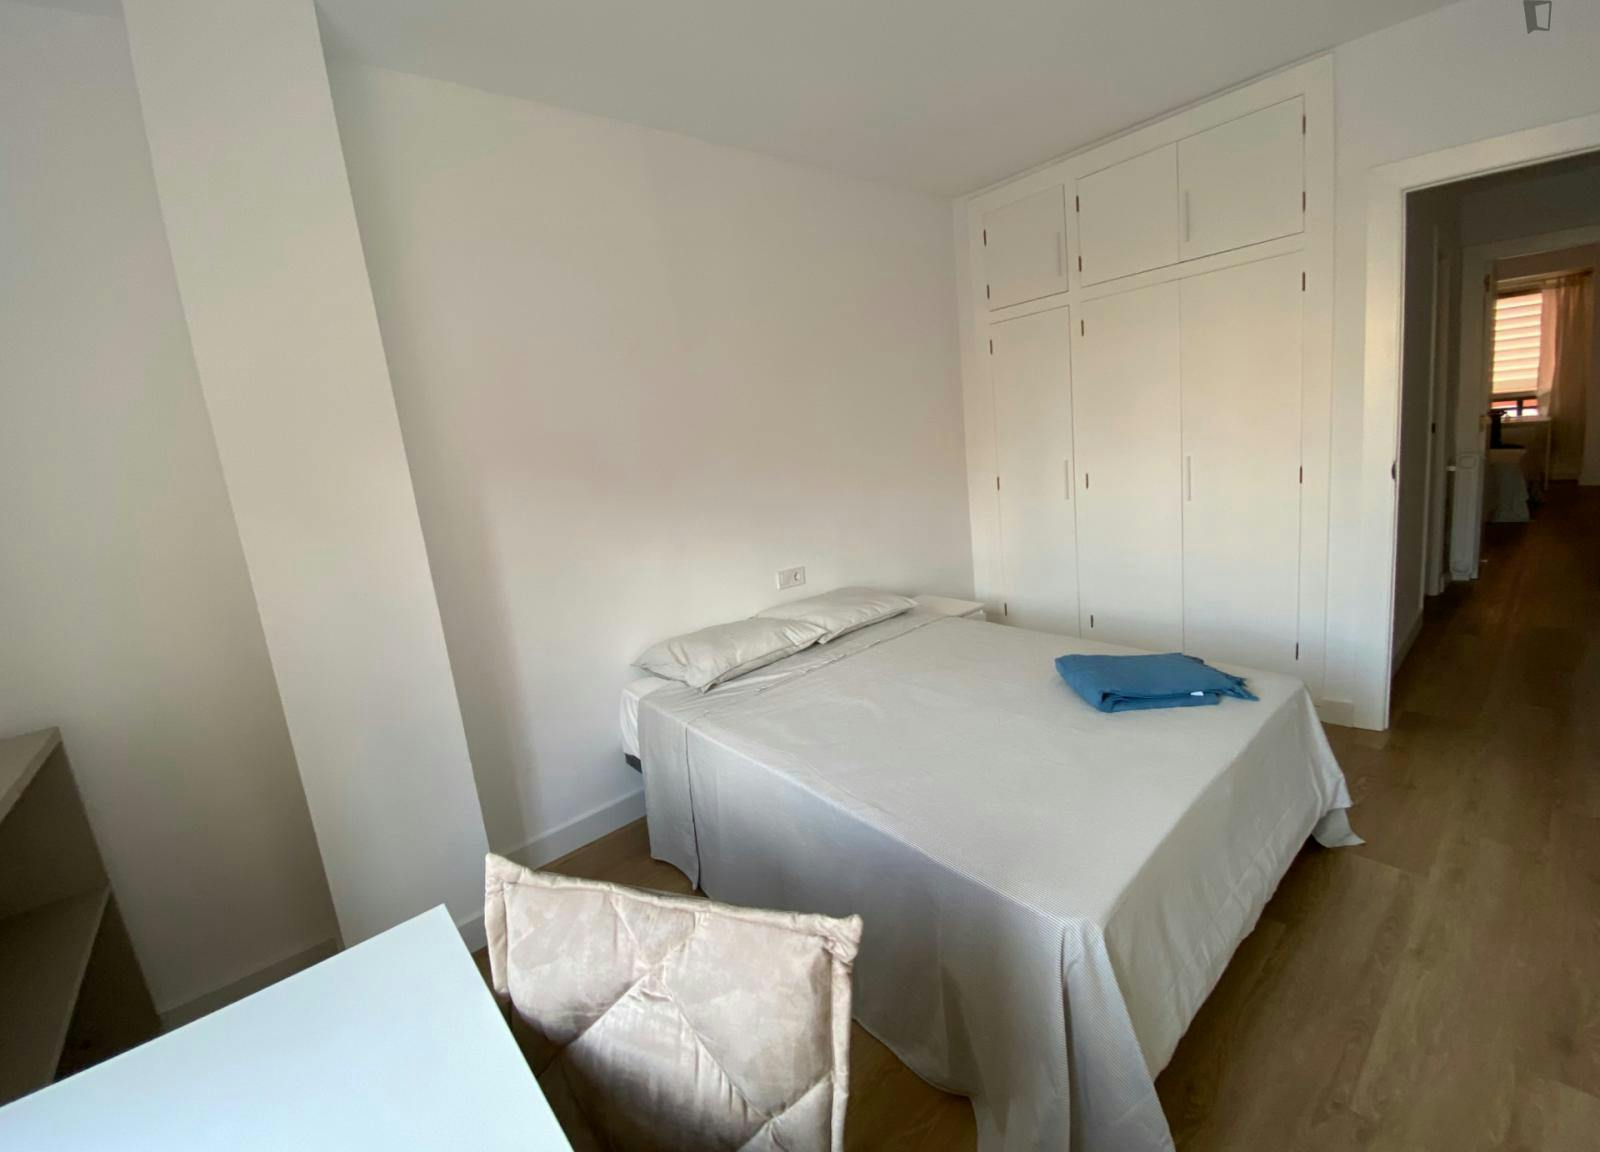 Great Bright Bedroom in UPMOST CENTRAL and fully RENOVATED Apartment